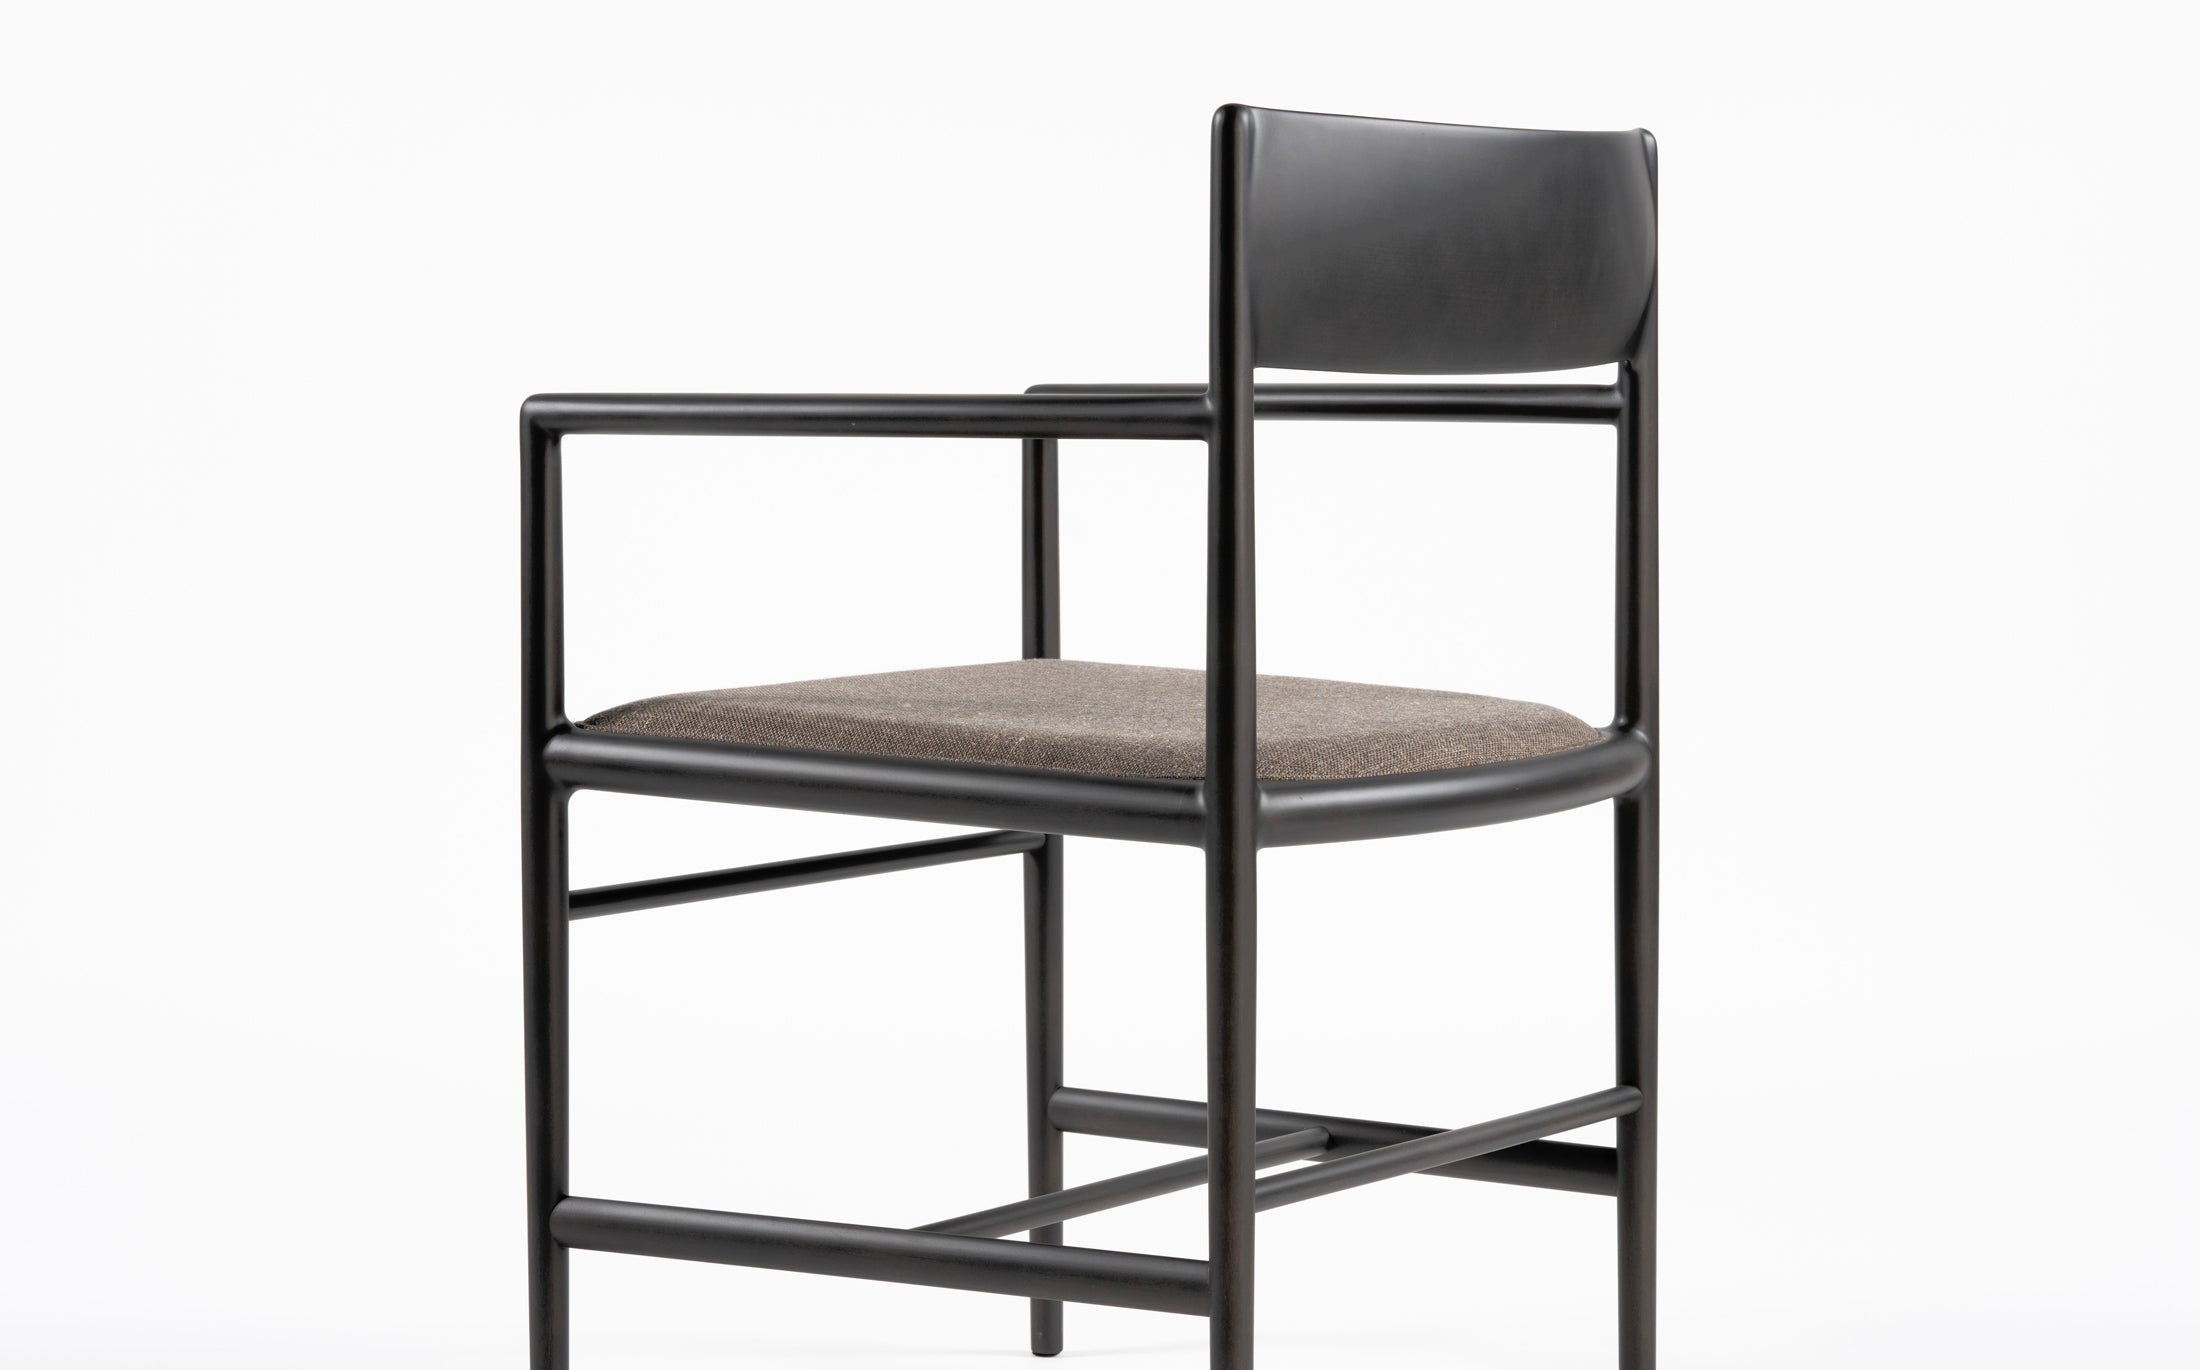 a chair on the vertical axis - armchair - Charcoal grey